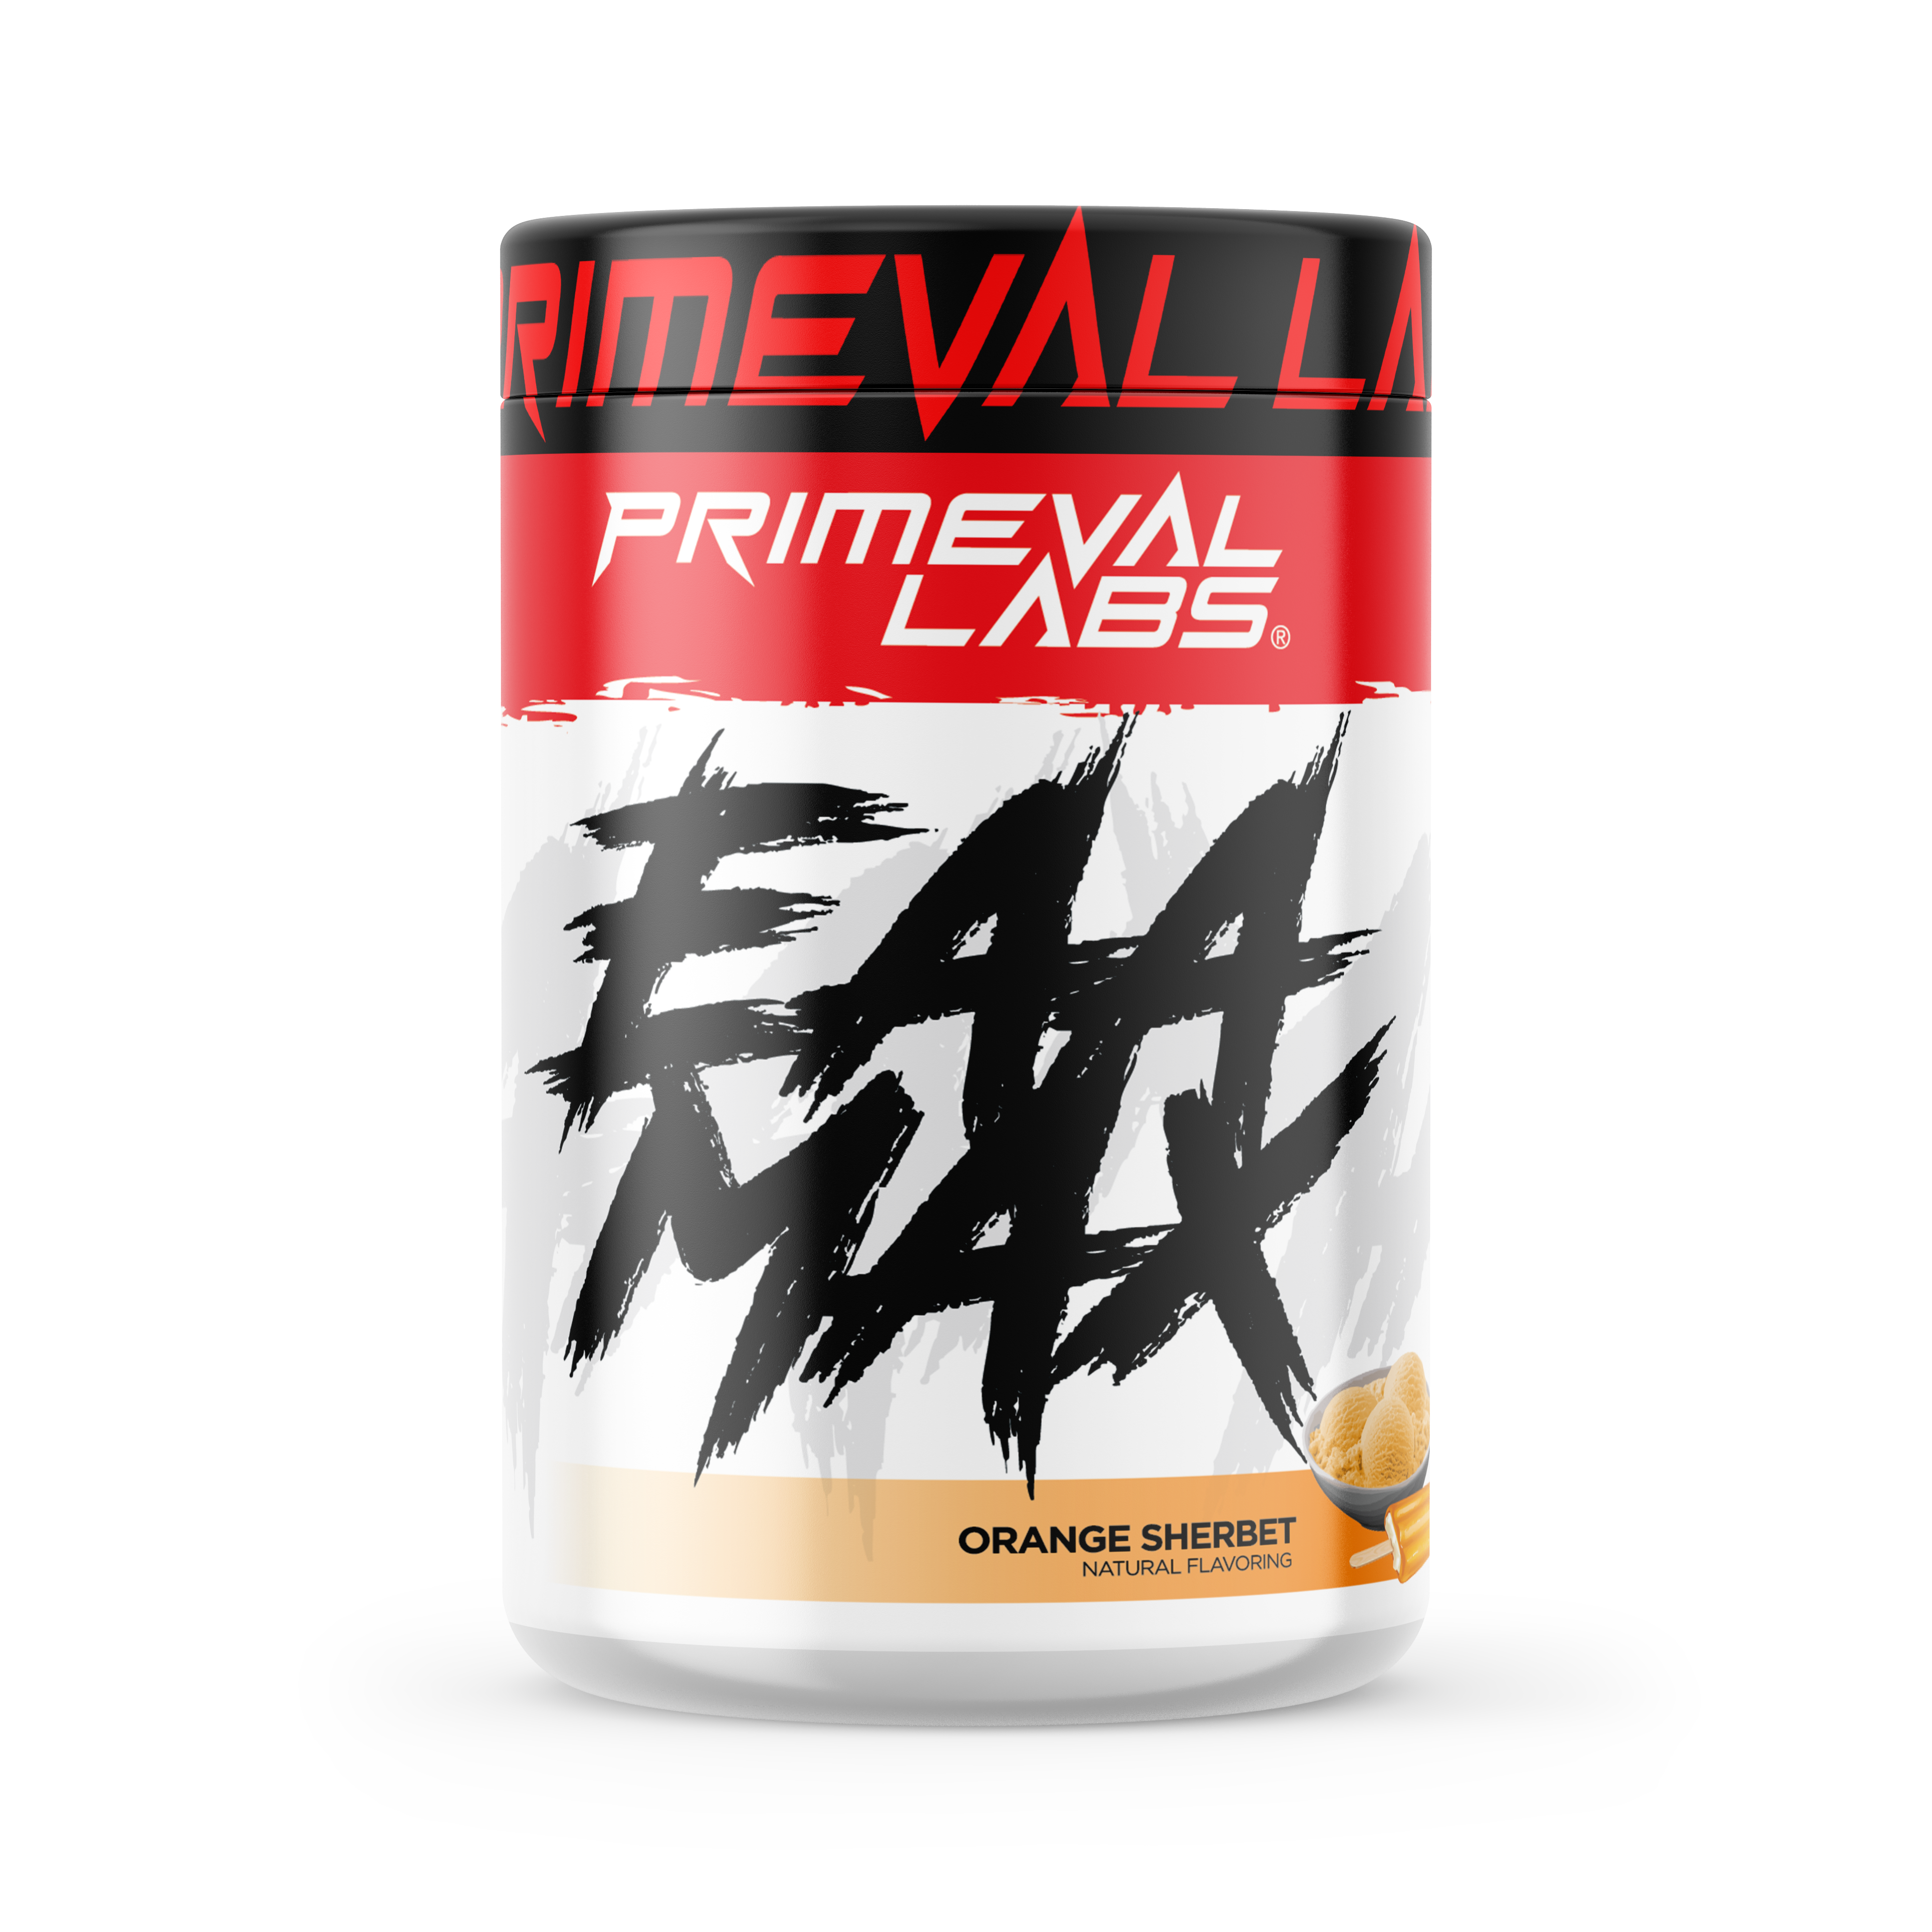 Primeval Labs EAA Max - A1 Supplements Store